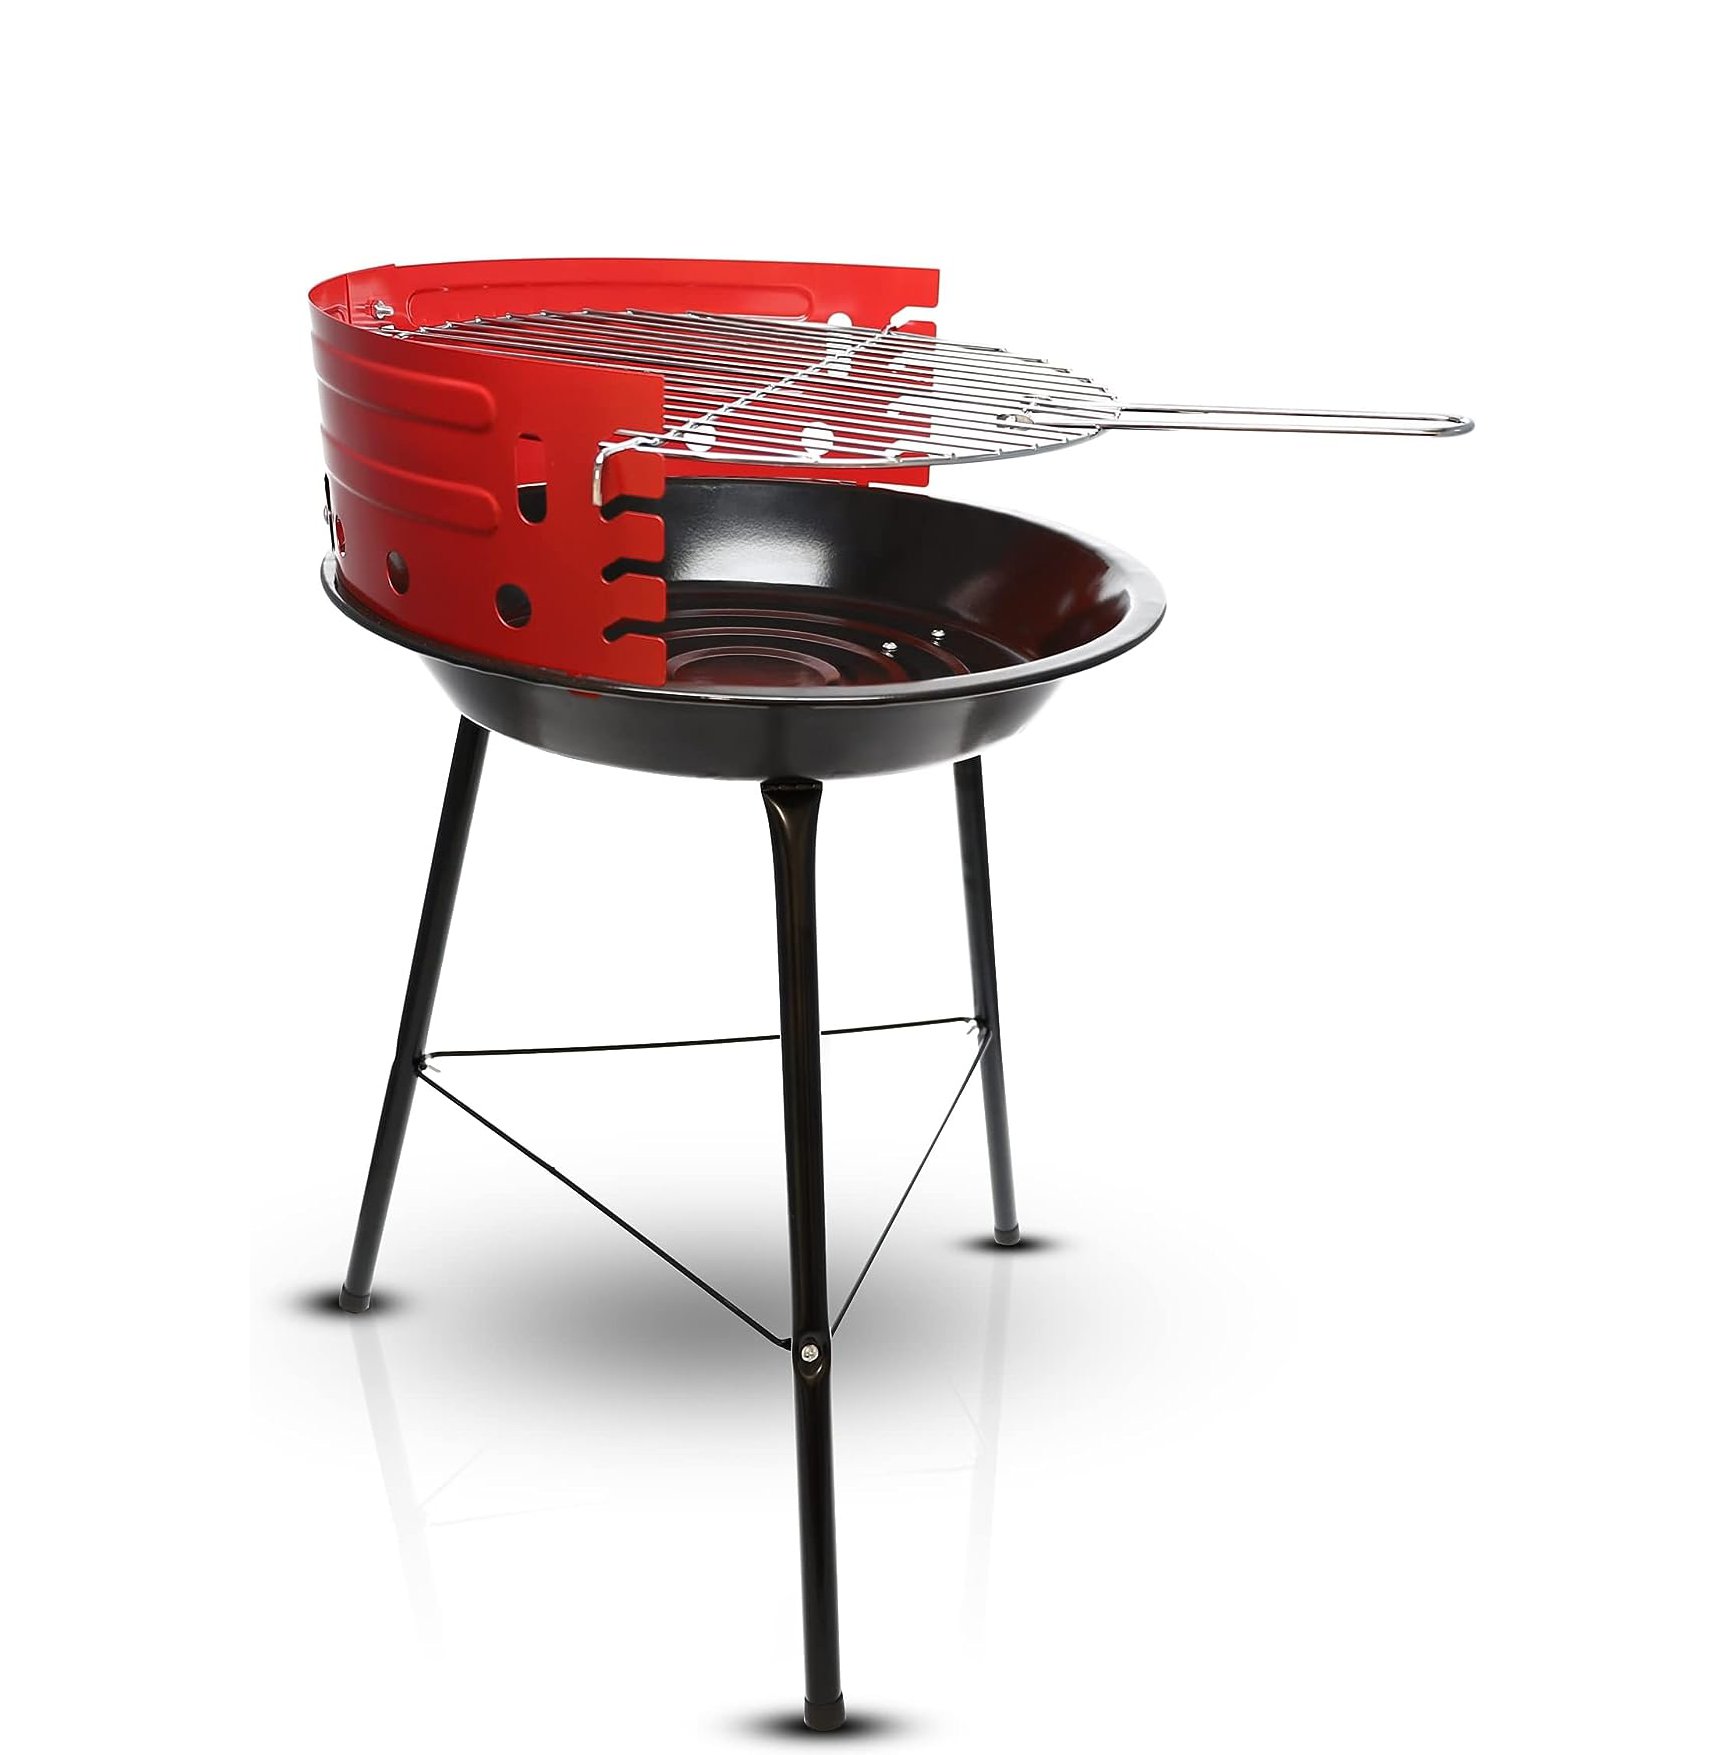 16inch Portable Charcoal Grill Barbecue Grill